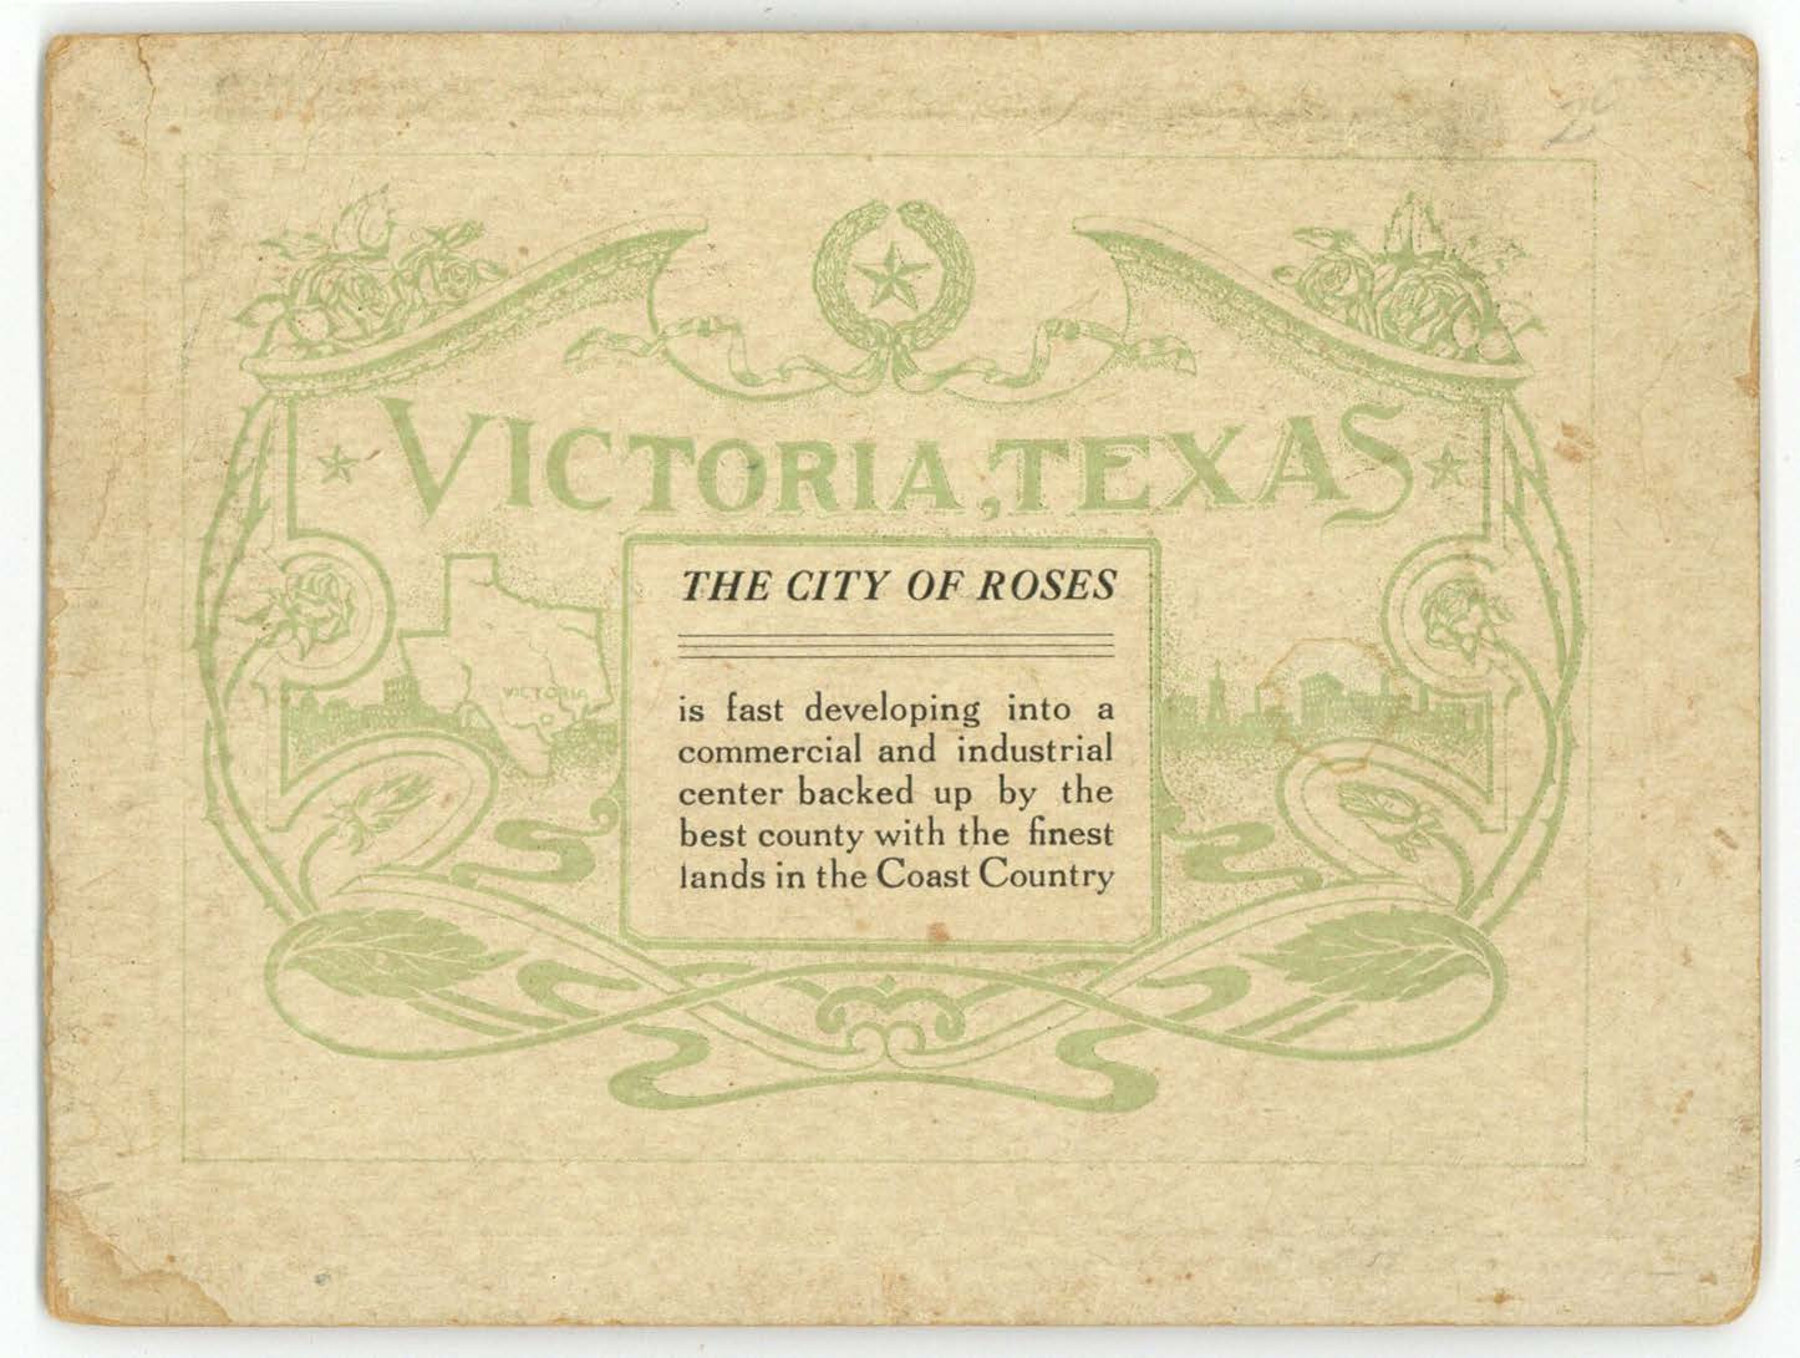 97056, Victoria, Texas: The City of Roses